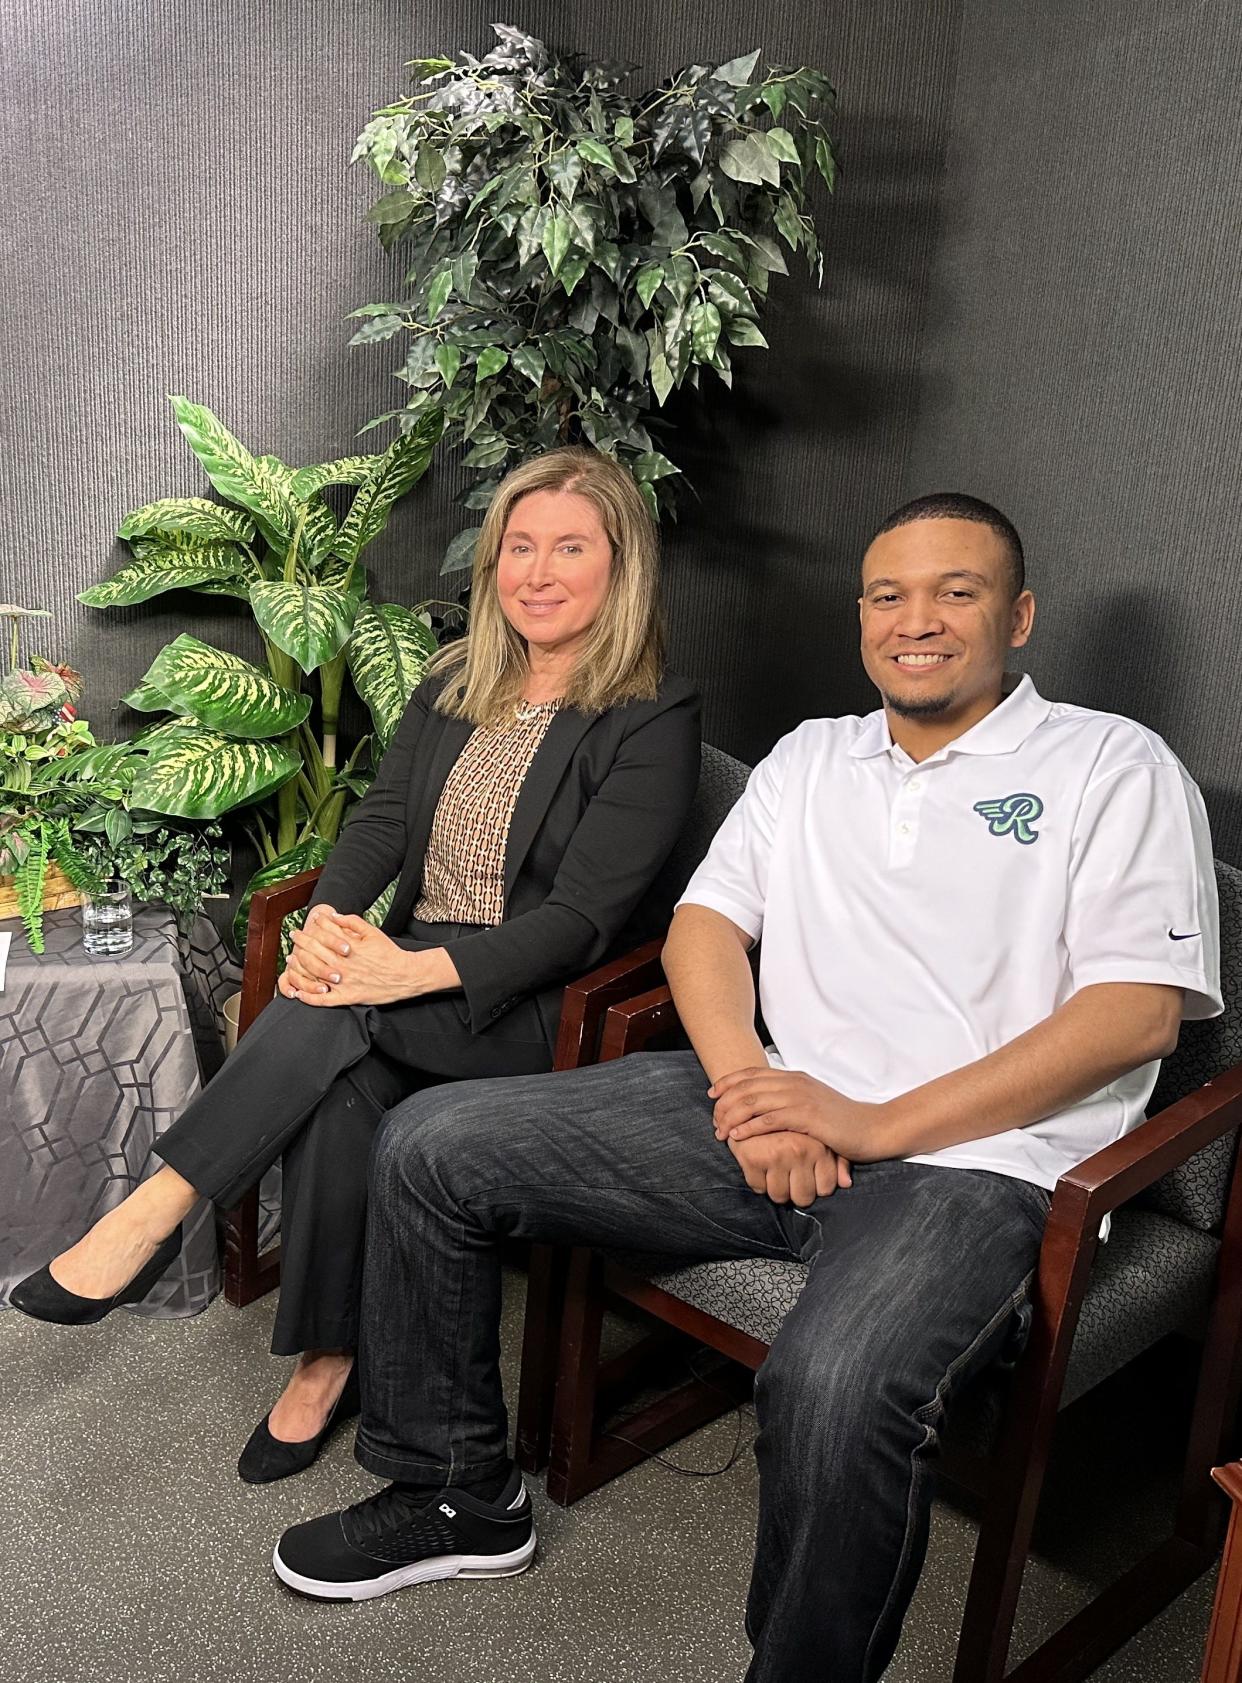 Cannabis Control Commissioner Kimberly Roy, left, and co-founder of Rolling Releaf, a cannabis delivery service, Devin Alexander at Quincy Access Television studios.